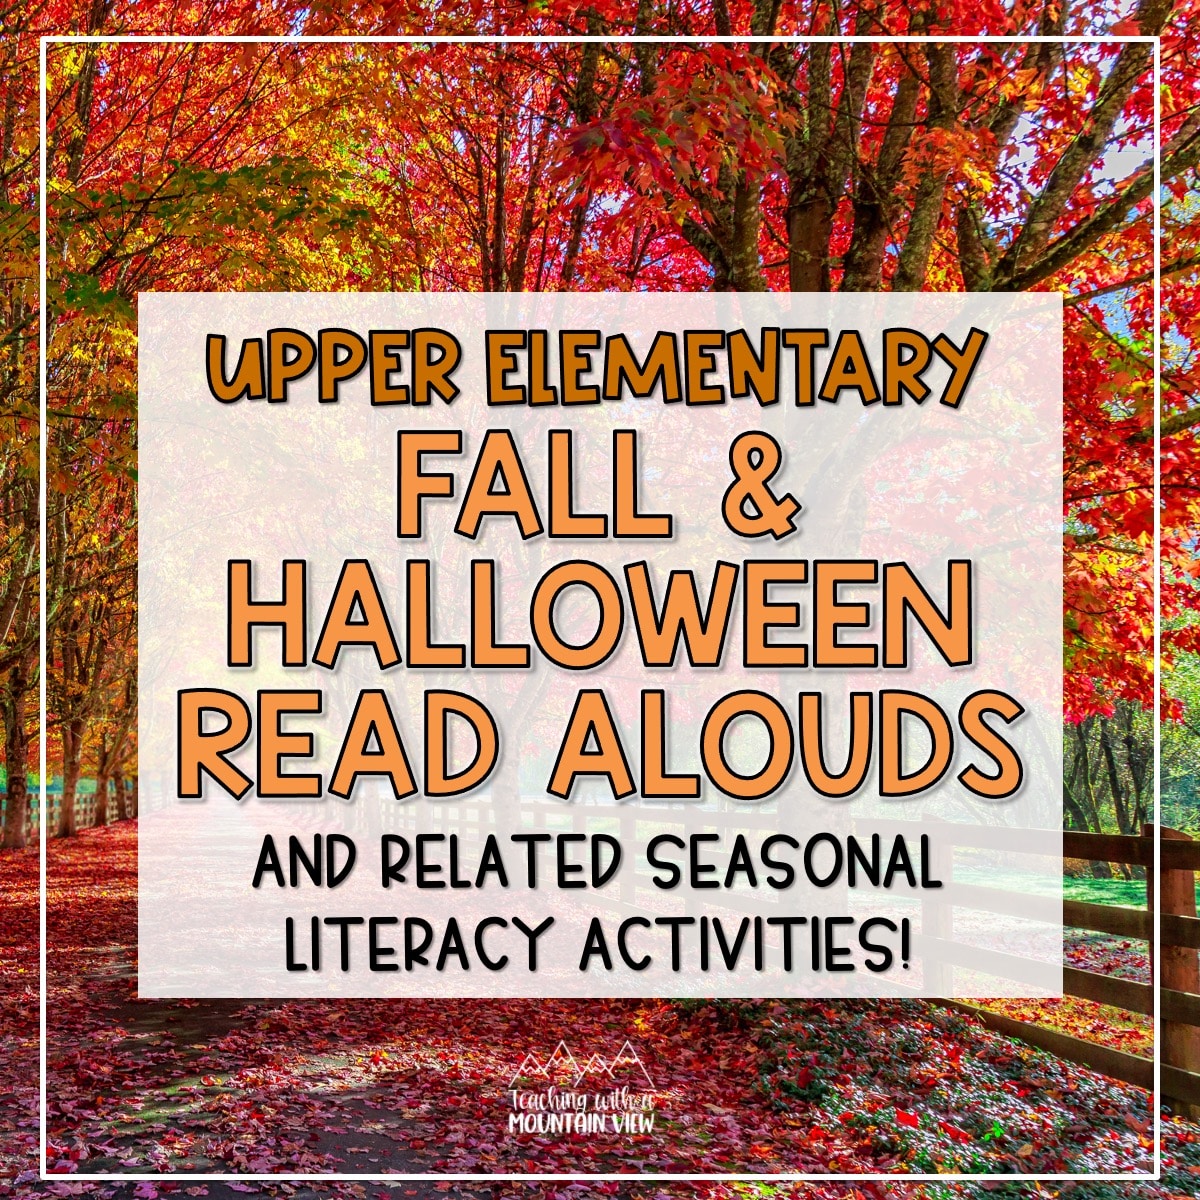 Here are some of my favorite fall read alouds, along with different fall literacy activities that are all great for upper elementary.